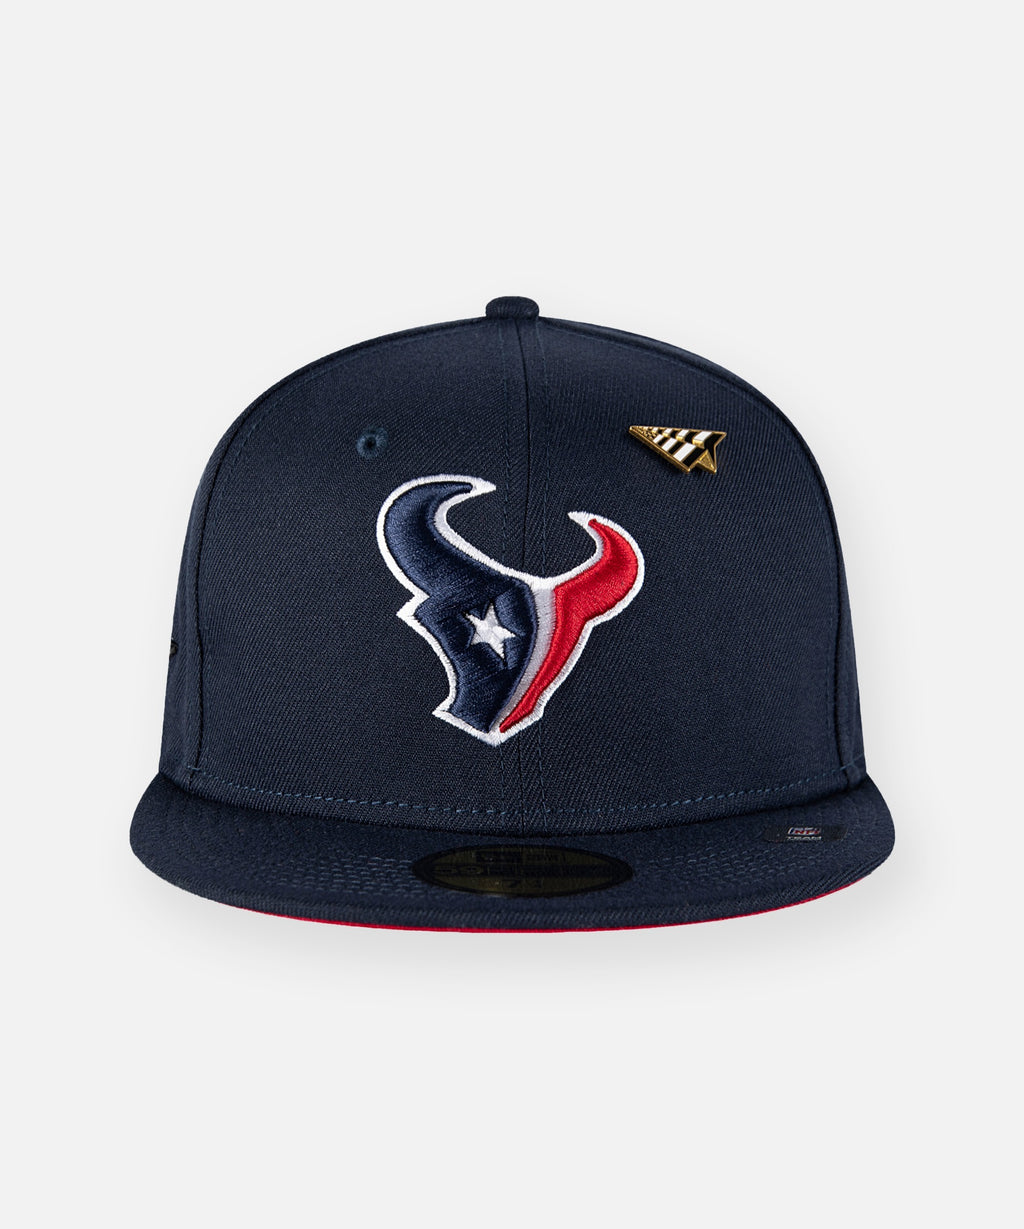 Paper Planes x Houston Texans Team Color 59Fifty Fitted Hat_For Men_1